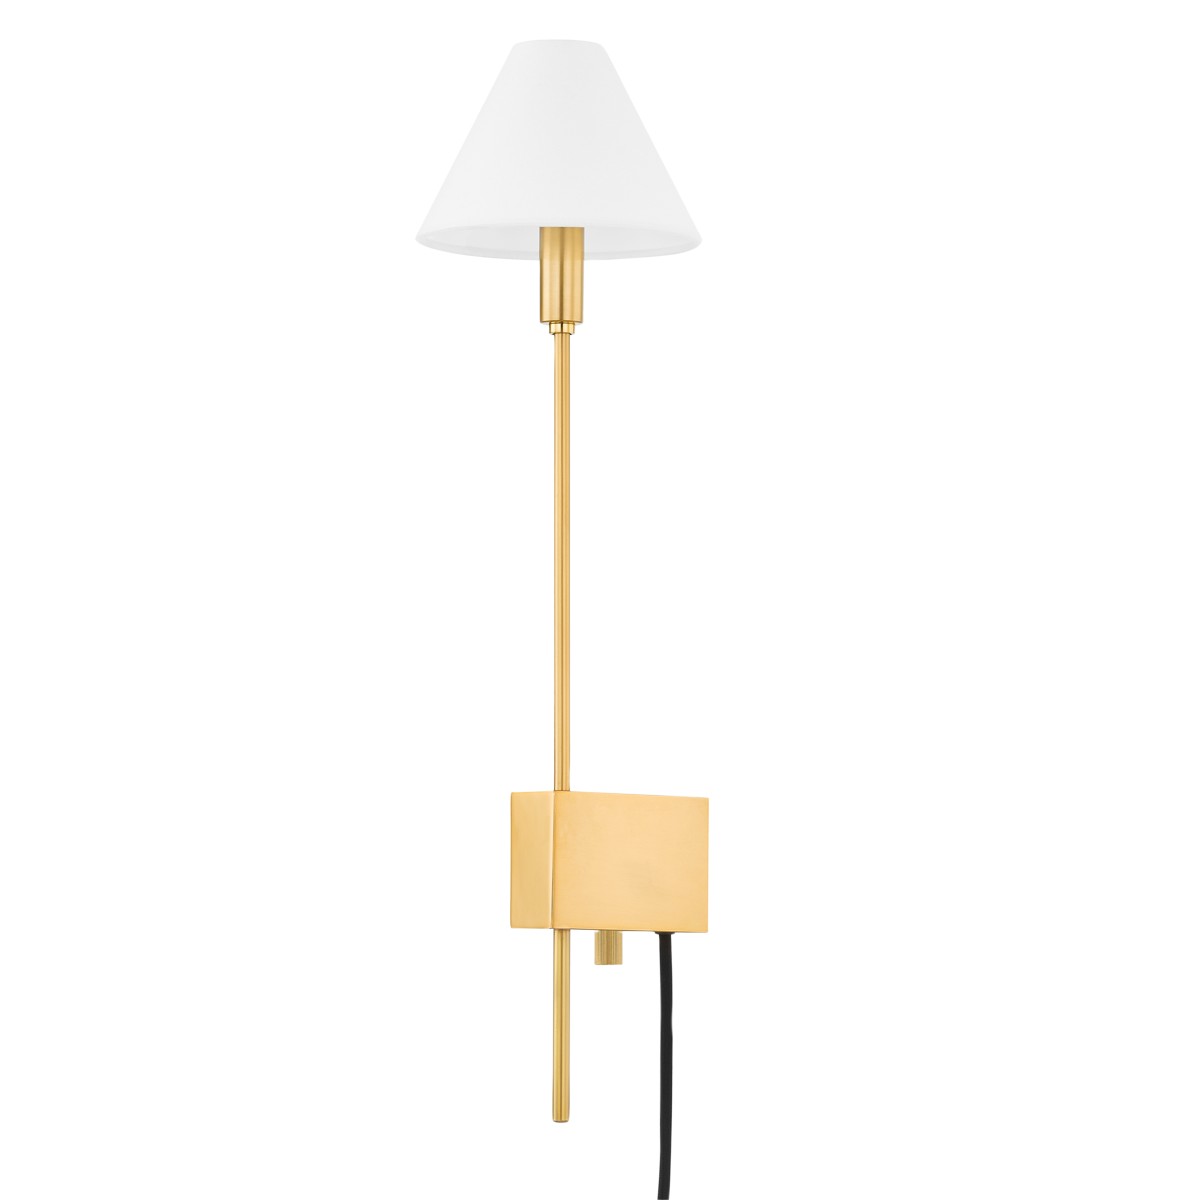 Hudson Valley - 5424-AGB - One Light Wall Sconce - Teaneck - Aged Brass